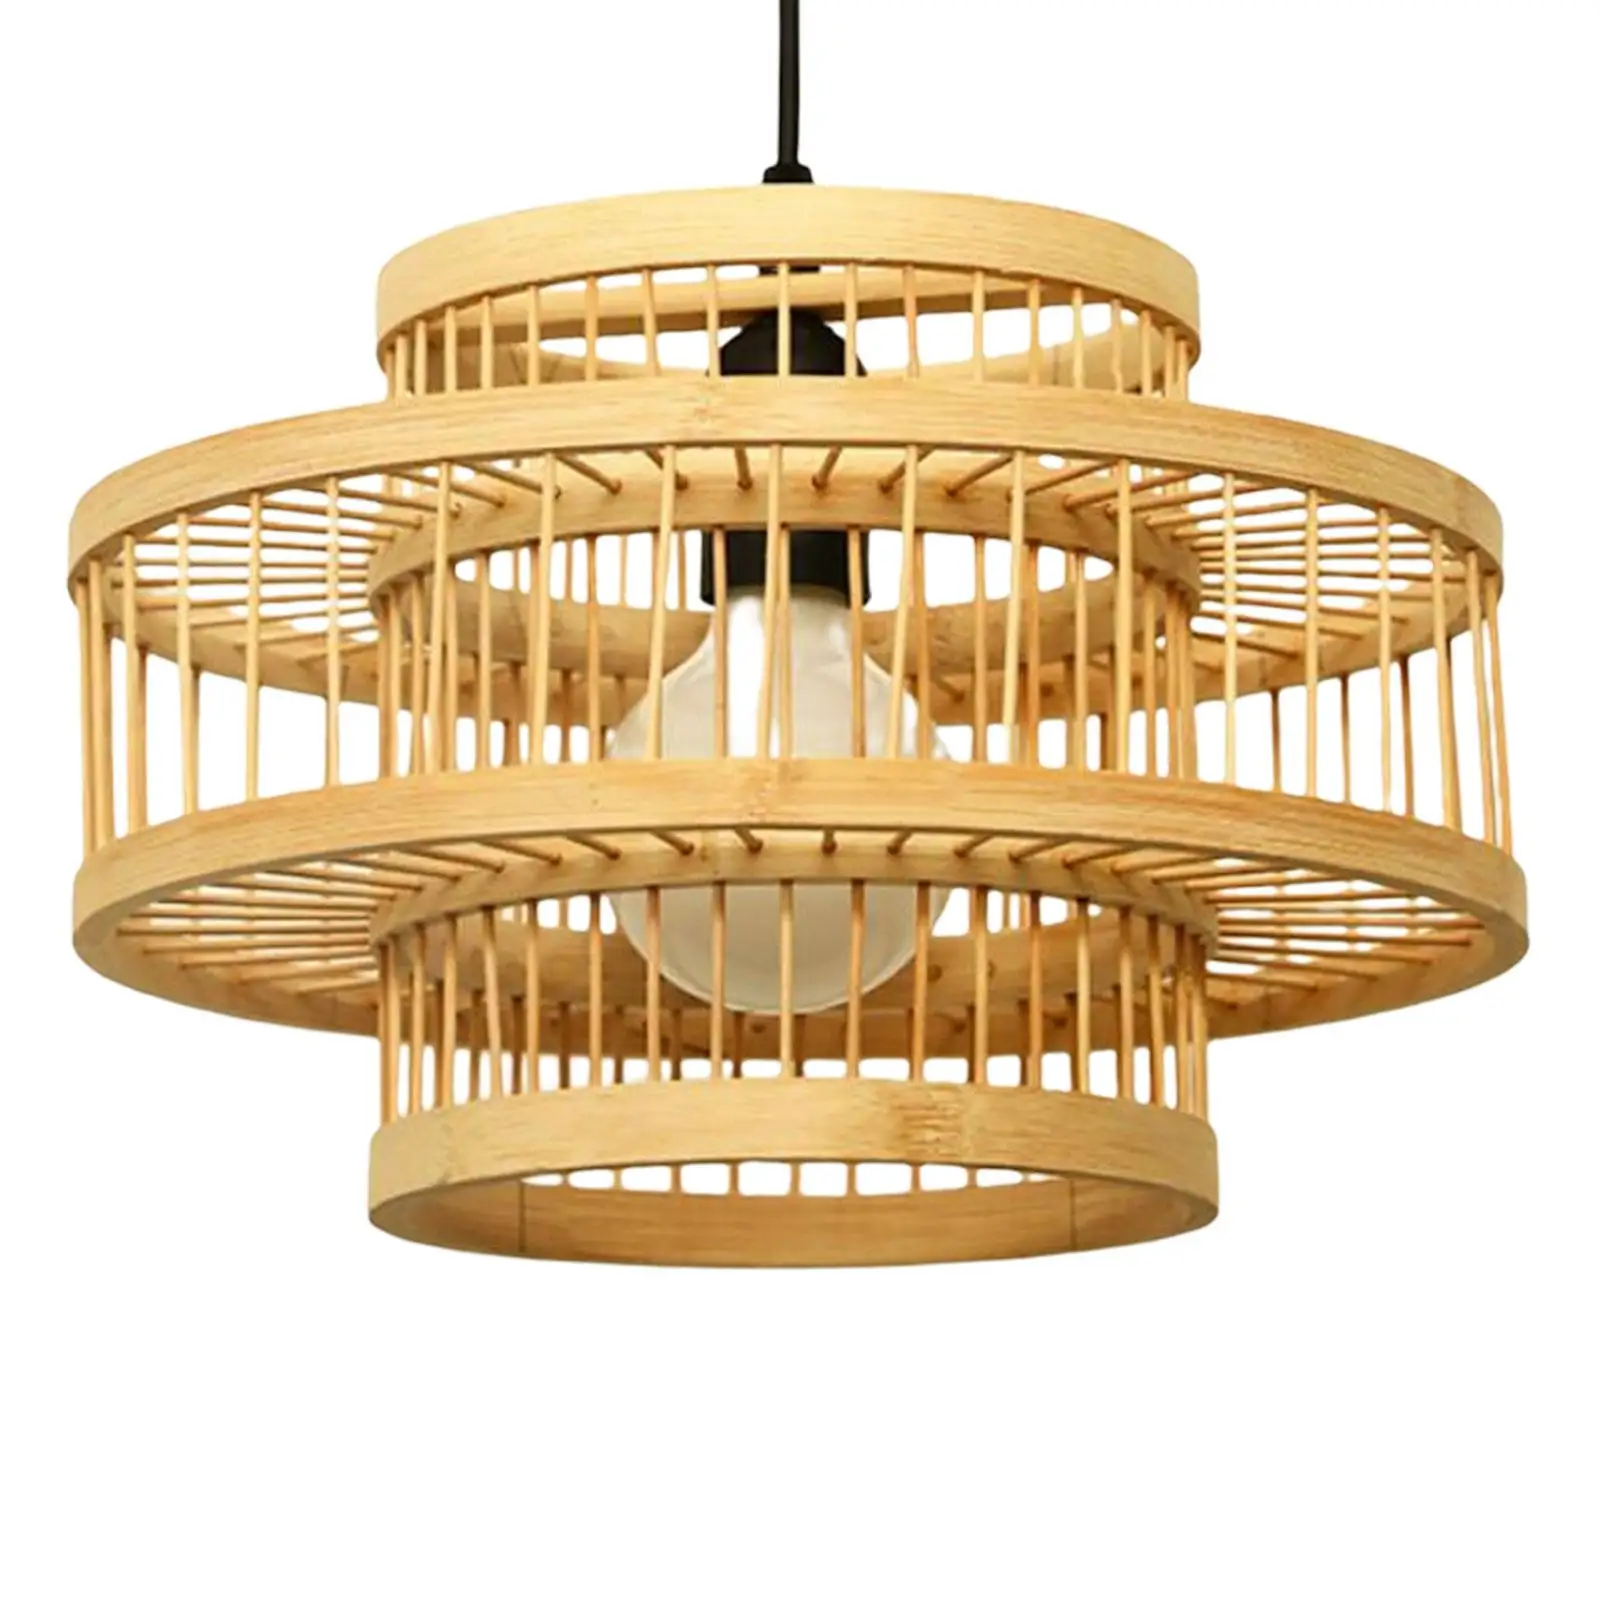 Woven Bamboo Lamp Shade Ceiling Light Cover Vintage Style Living Room